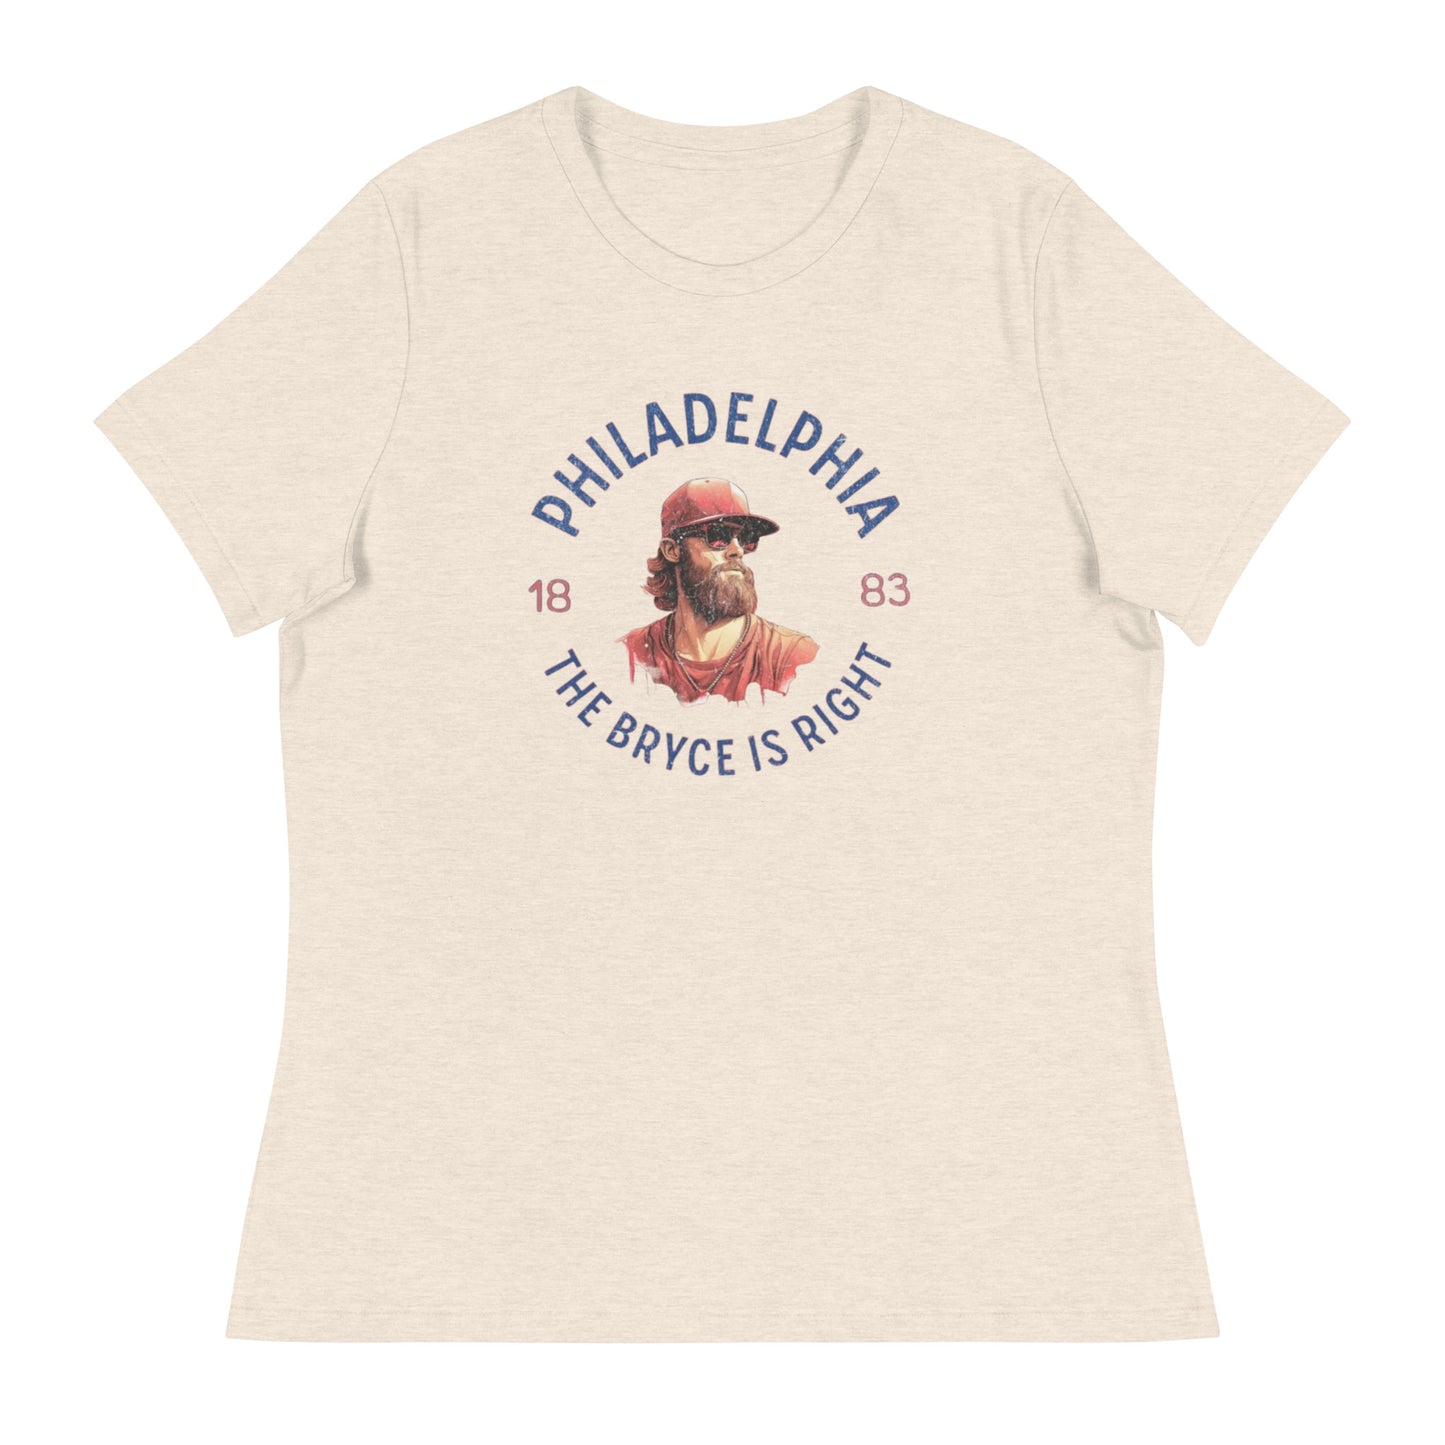 The Bryce is Right Women's Tee